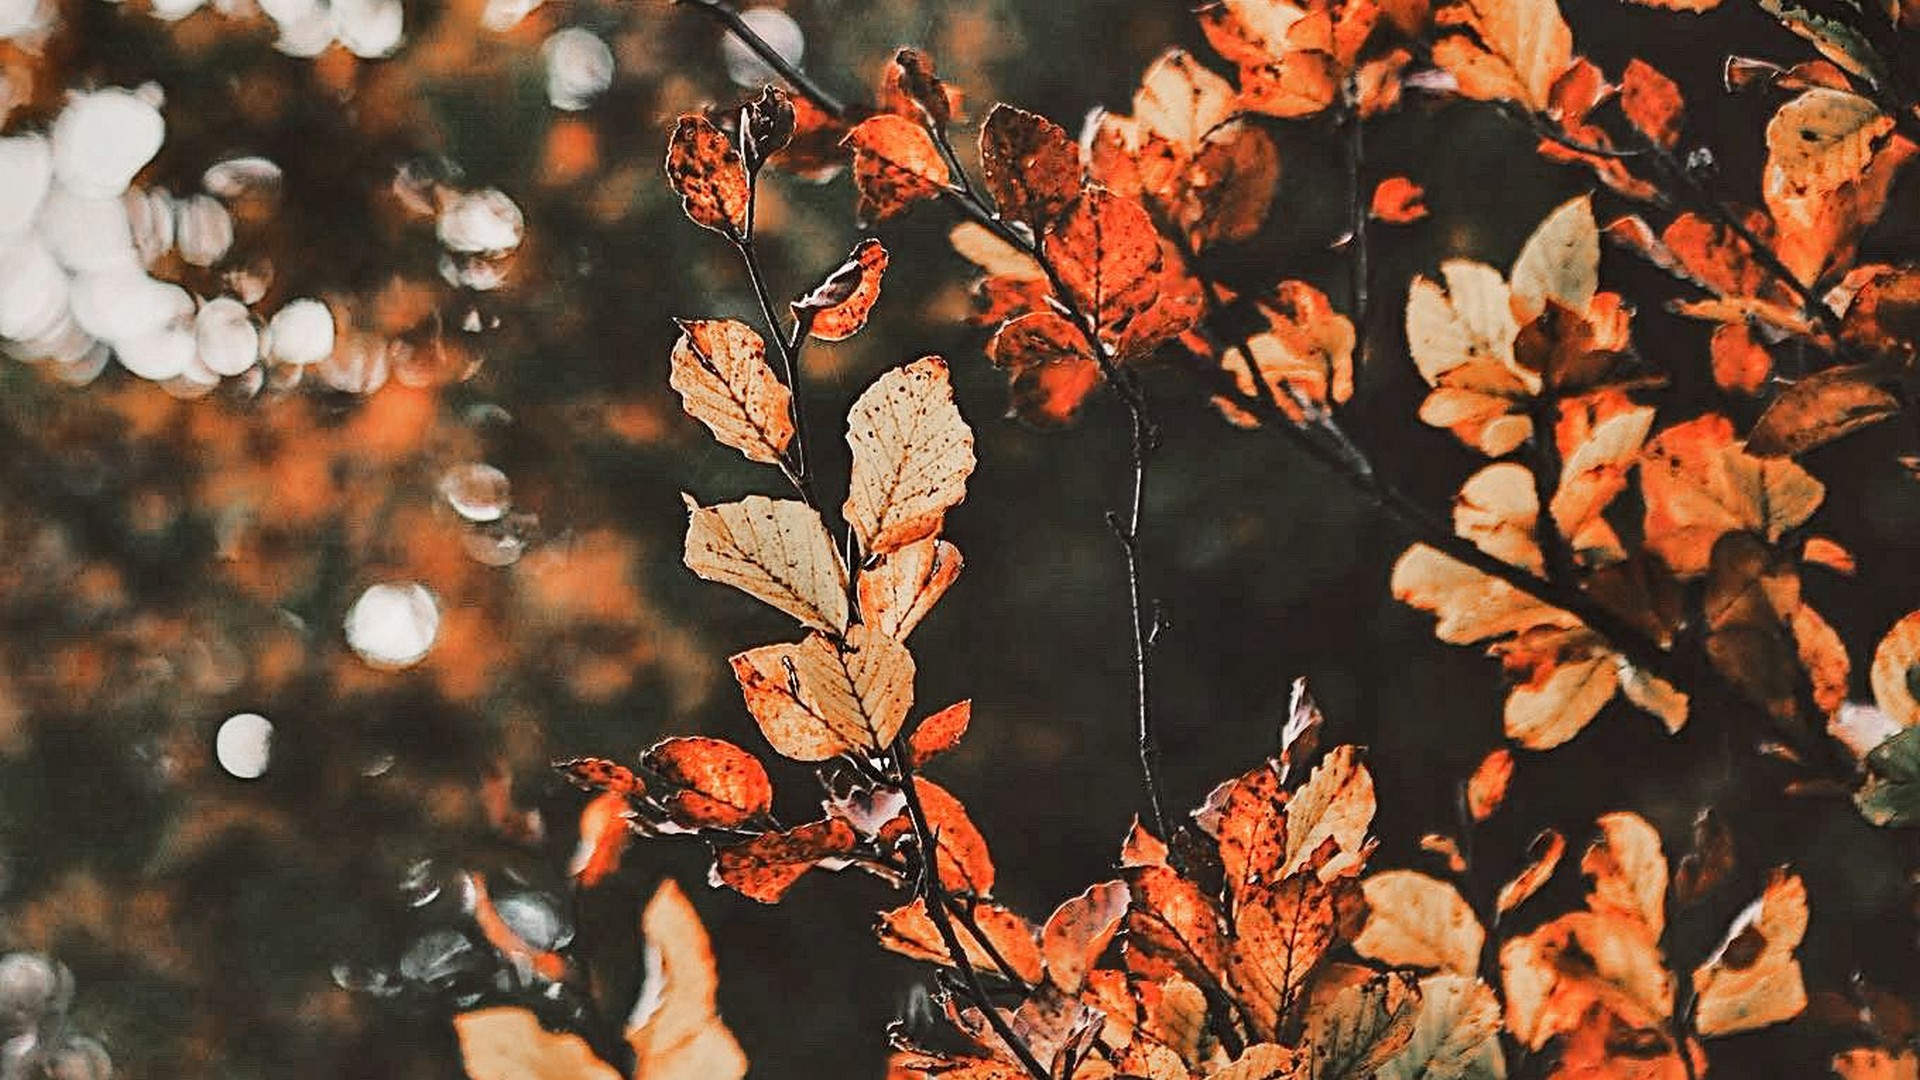 Autumn Live Wallpaper Free Android Live Wallpaper download  Appraw